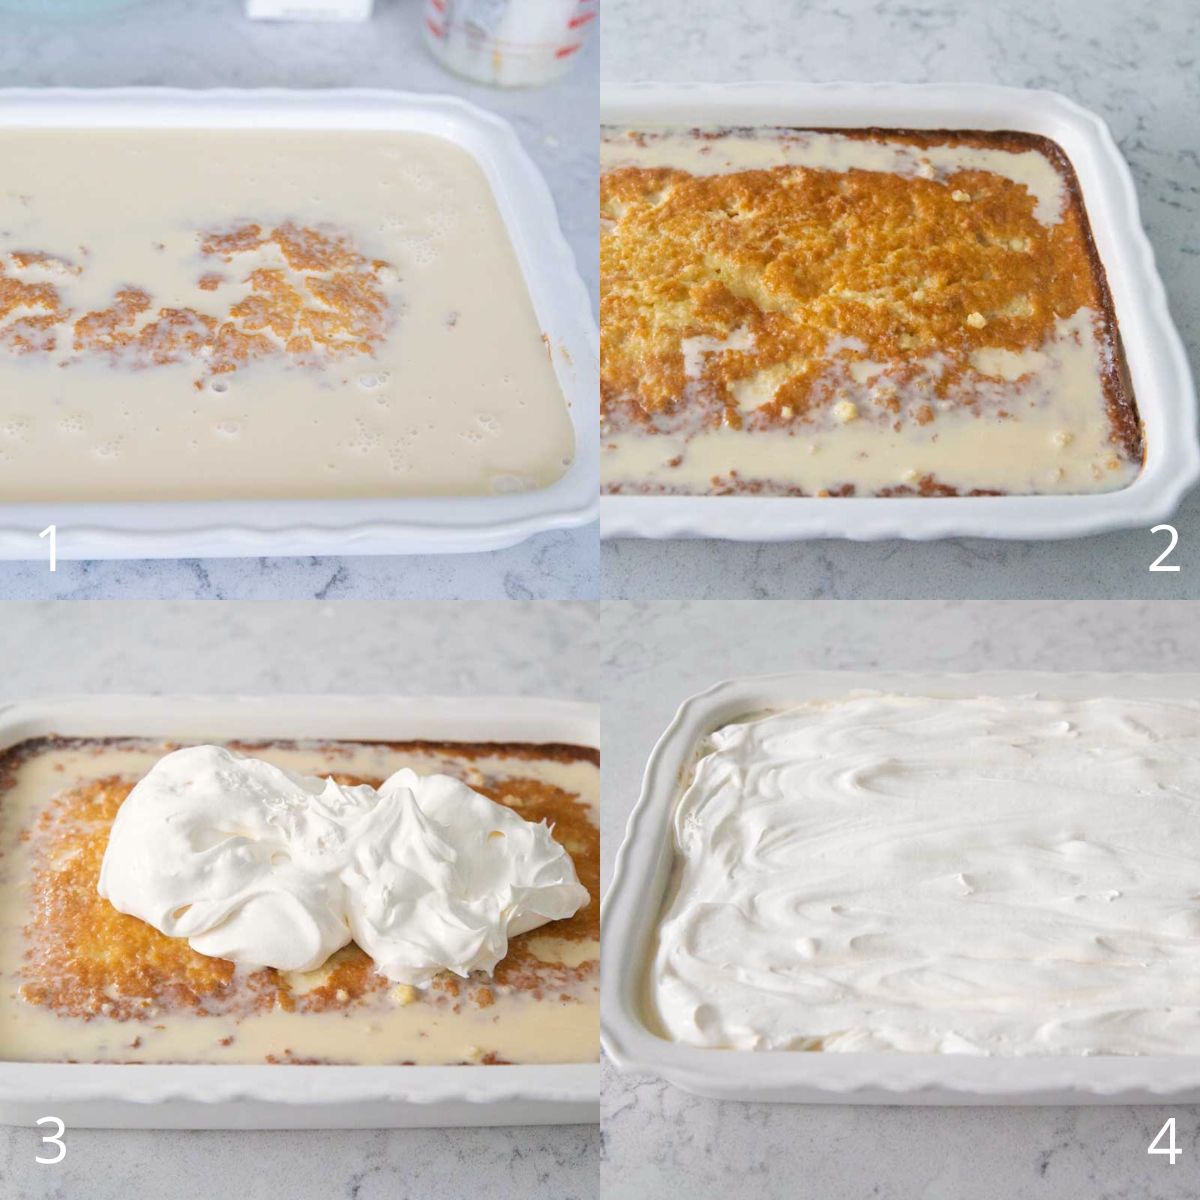 The step by step photos show how to pour the three milks sauce over the cake and how it soaks into the baked cake. The last photos show how to spread the whipped topping over the top.